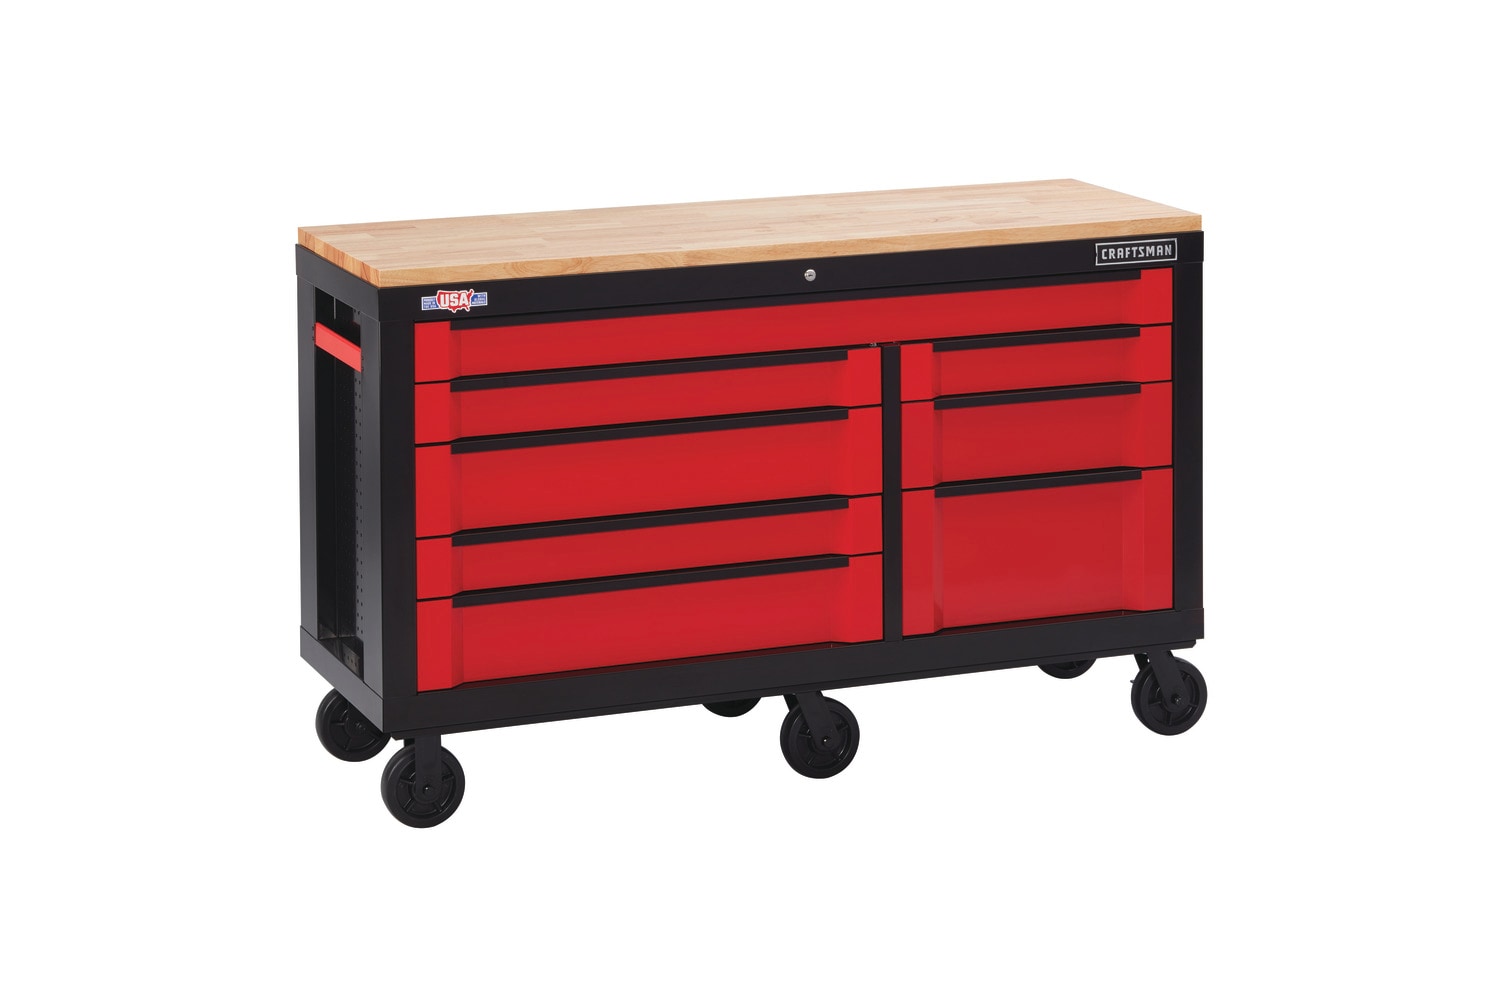 CRAFTSMAN 3000 Series 63-in W x 37-in H 8-Drawer Steel Rolling